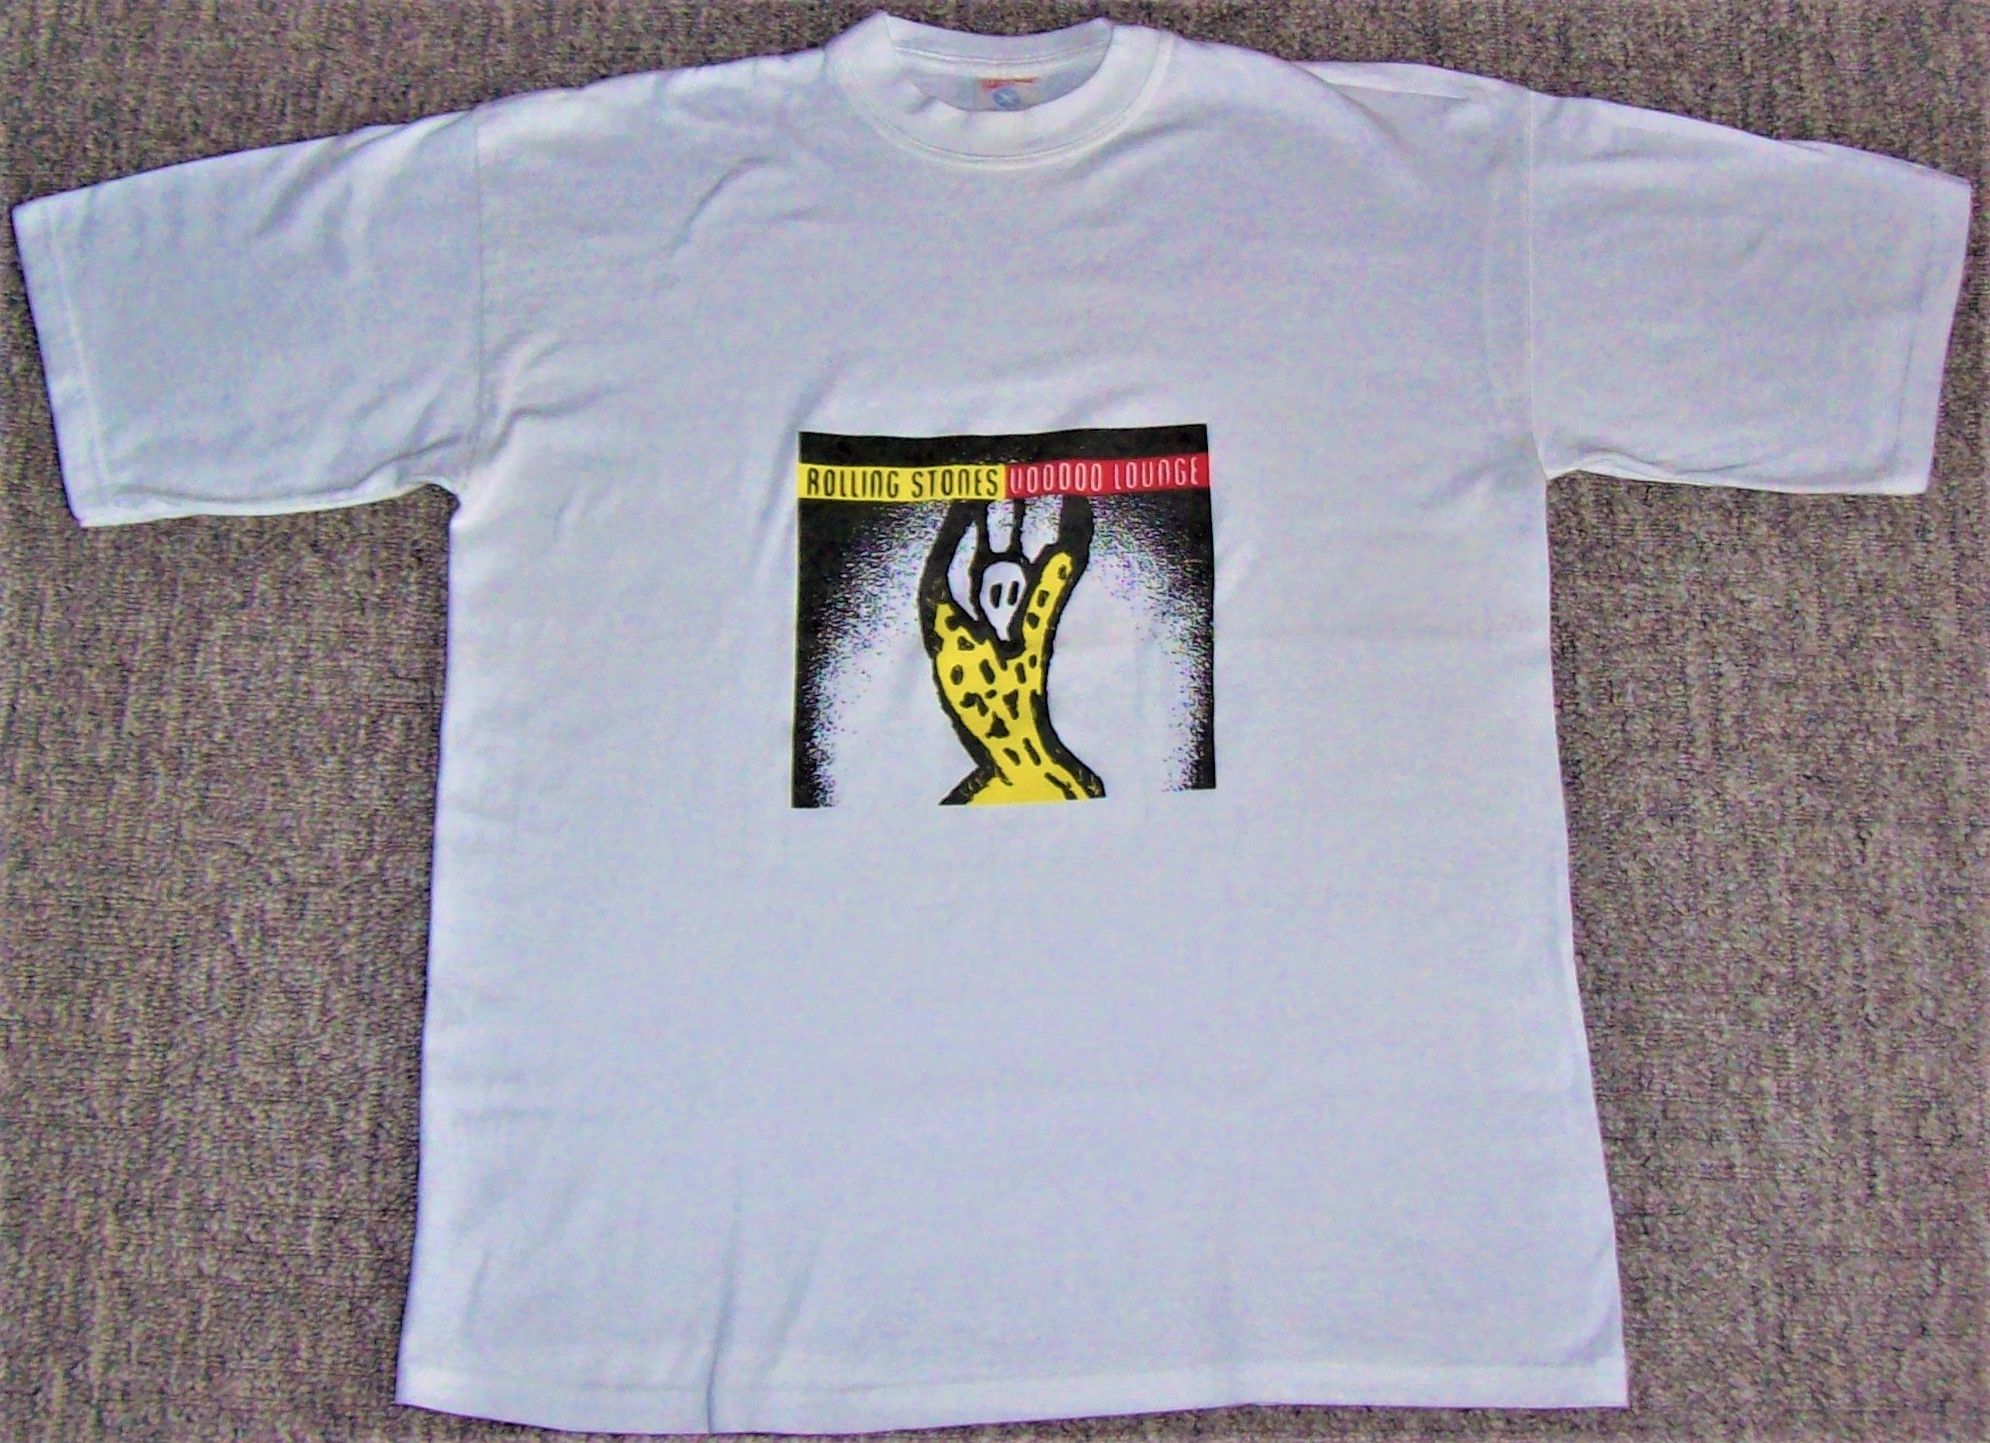 THE ROLLING STONES 1994-1995 'VOODOO LOUNGE' WORLD TOUR T-SHIRT WHITE